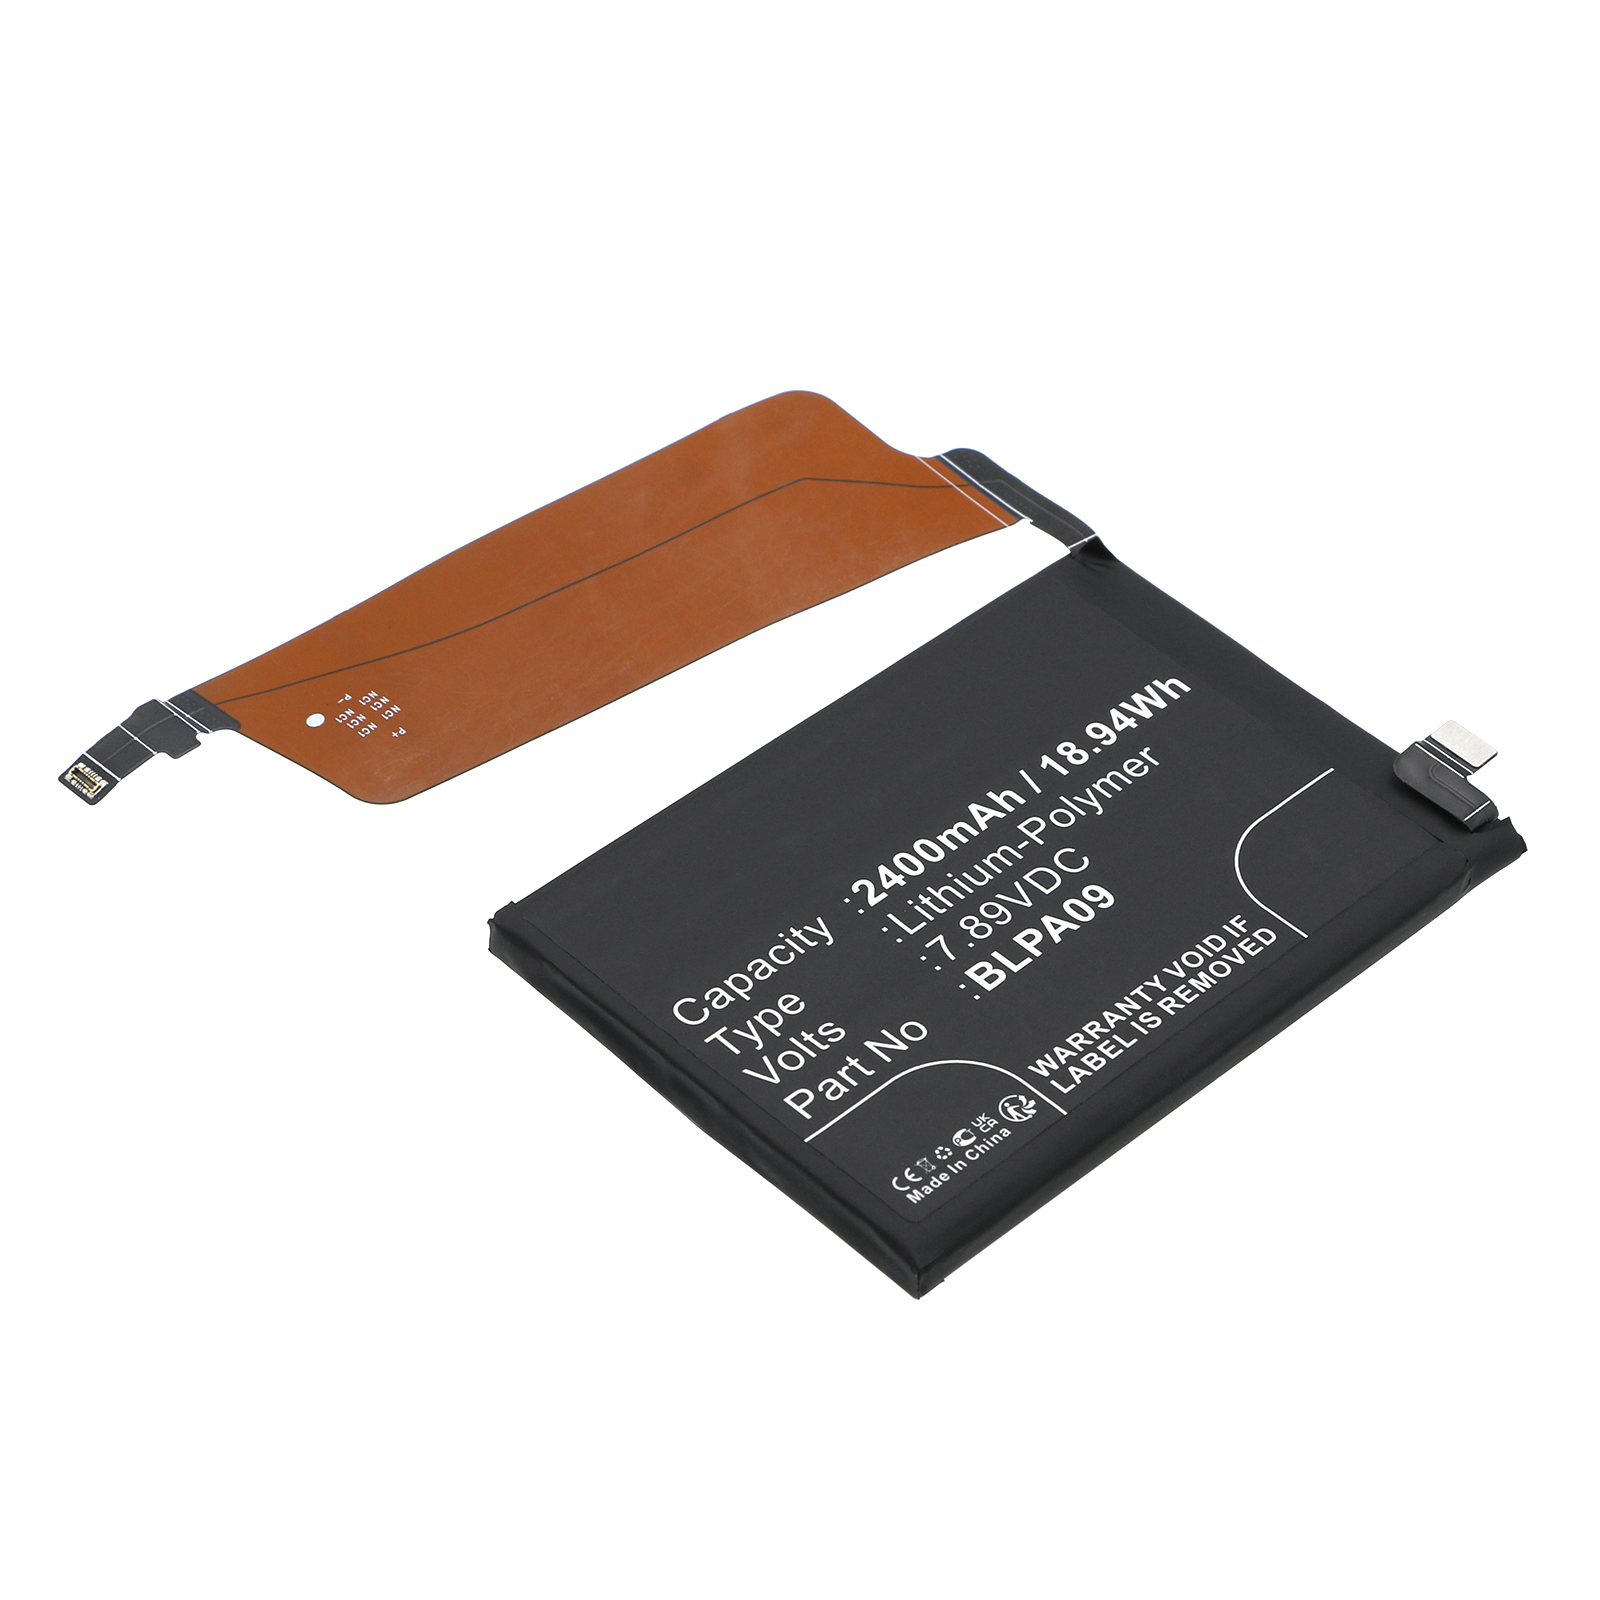 Synergy Digital Cell Phone Battery, Compatible with Oneplus BLPA09 Cell Phone Battery (Li-Pol, 7.89V, 2400mAh)